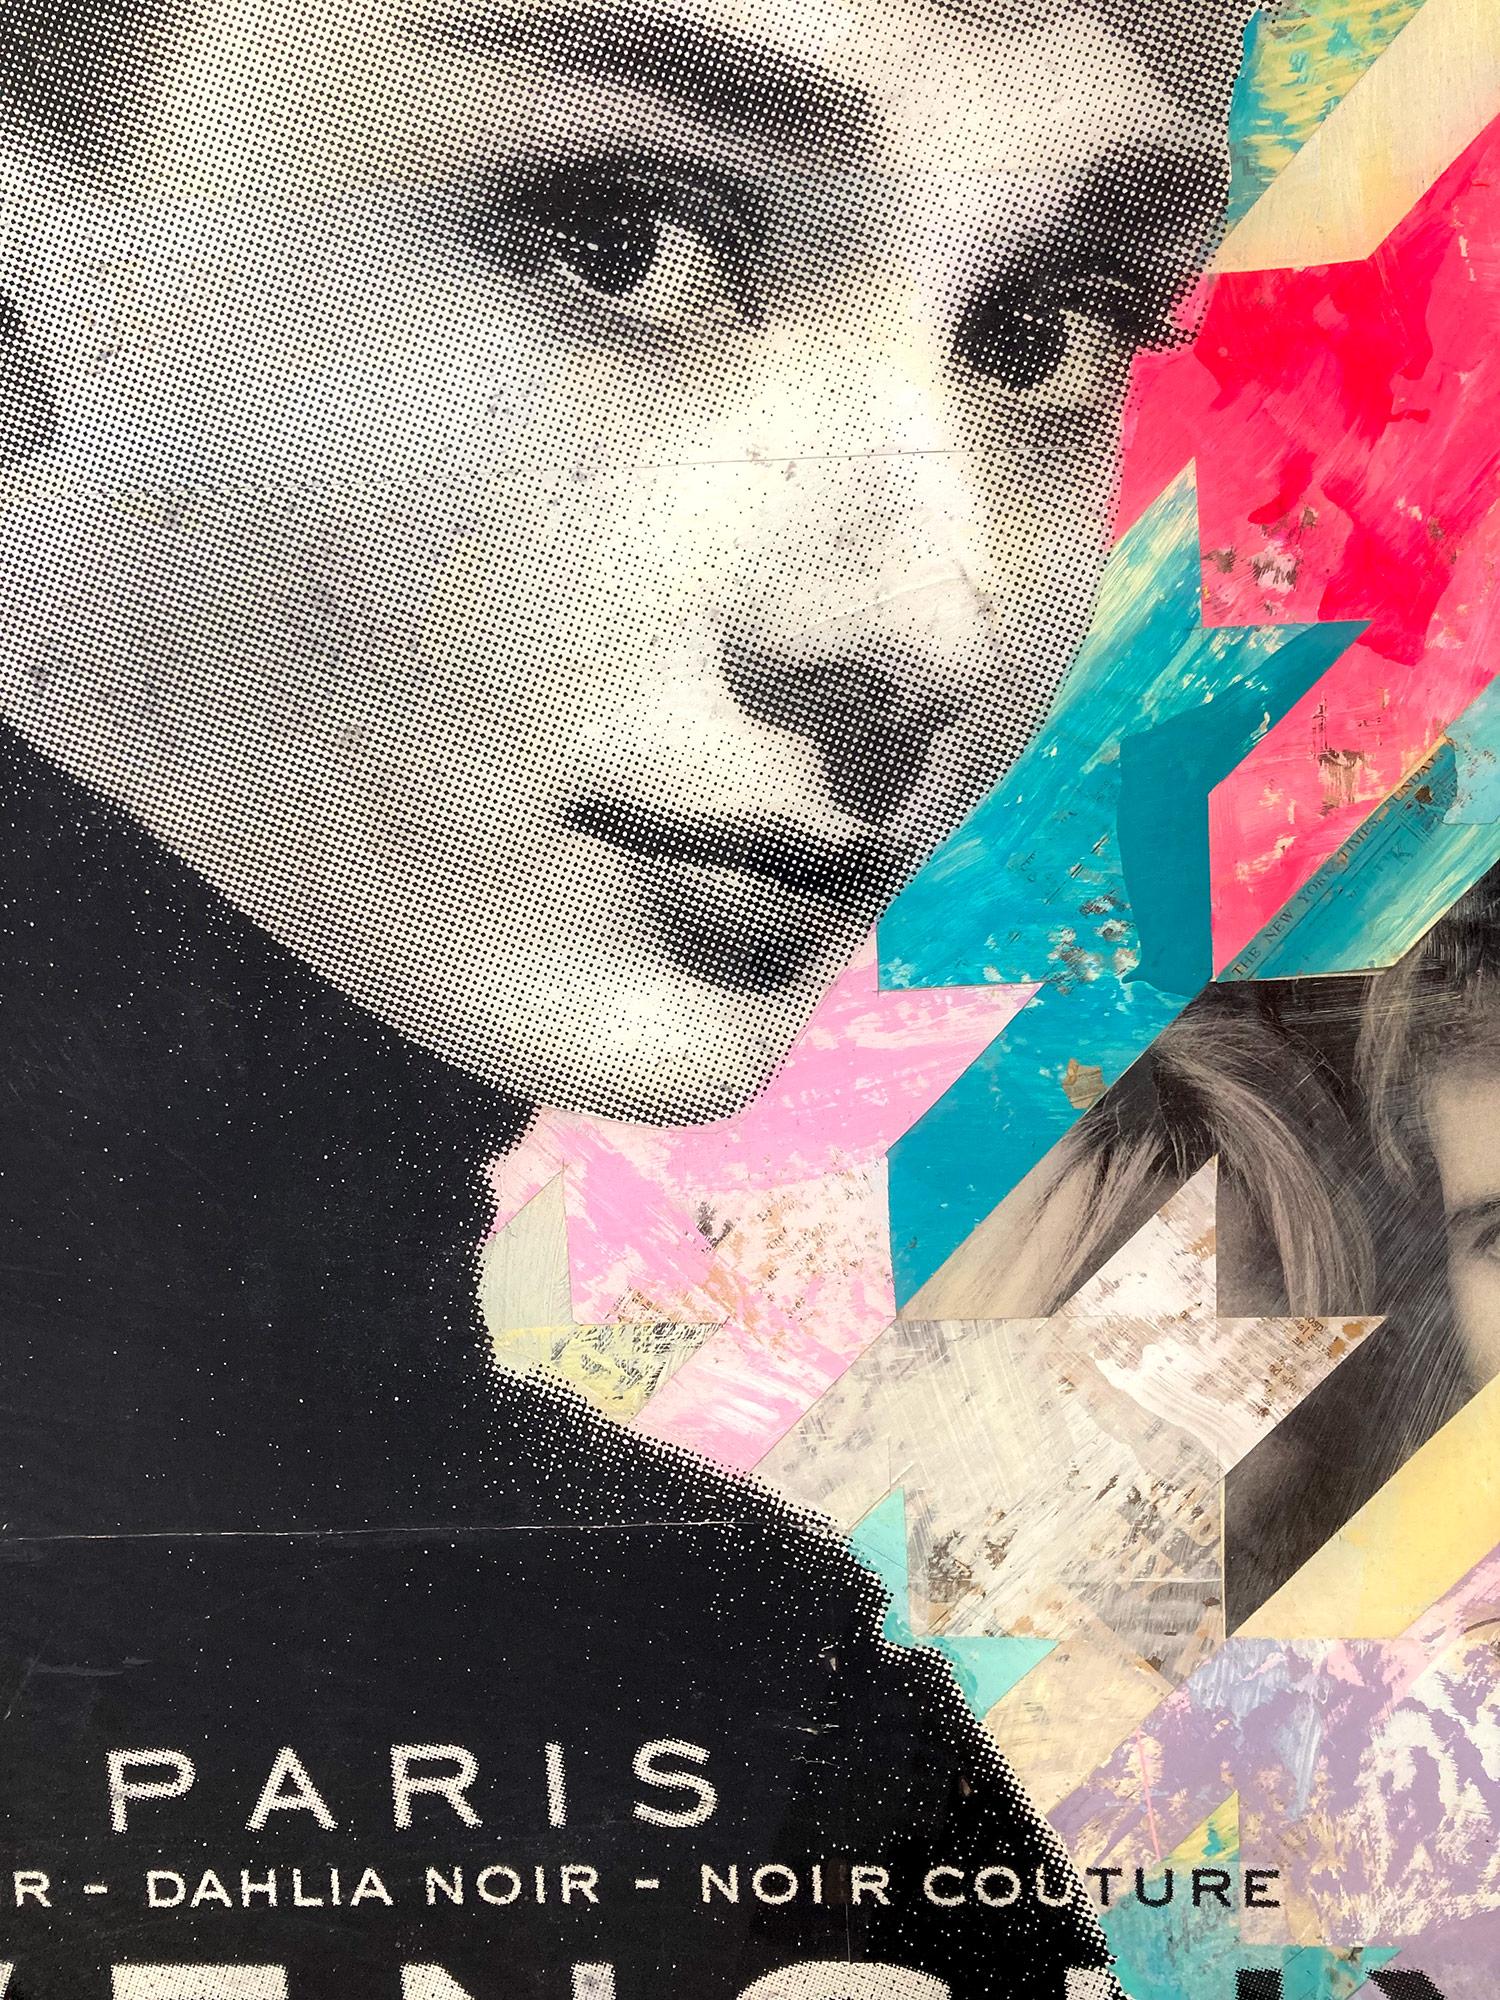 This piece depicts famous British actress and model Audrey Hepburn. Celebrating the icons from the Golden Era with expressive and bold colors by capturing these moments in history, his paintings serve as vehicles for bringing the American brand to